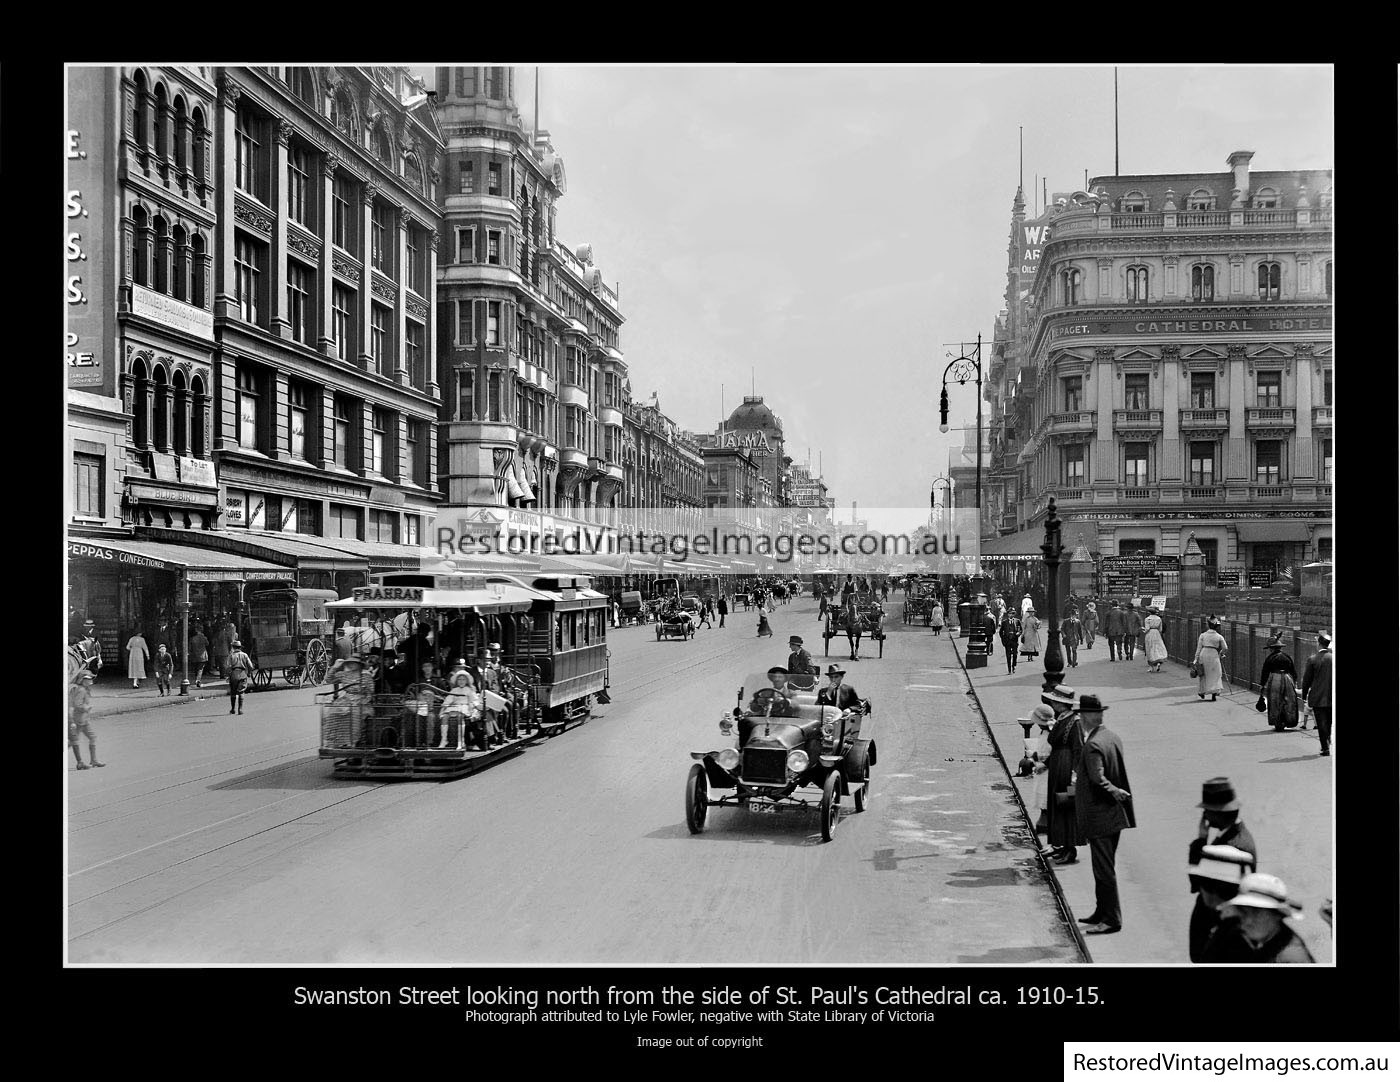 Swanston Street Looking North From St Paul’s 1910-15